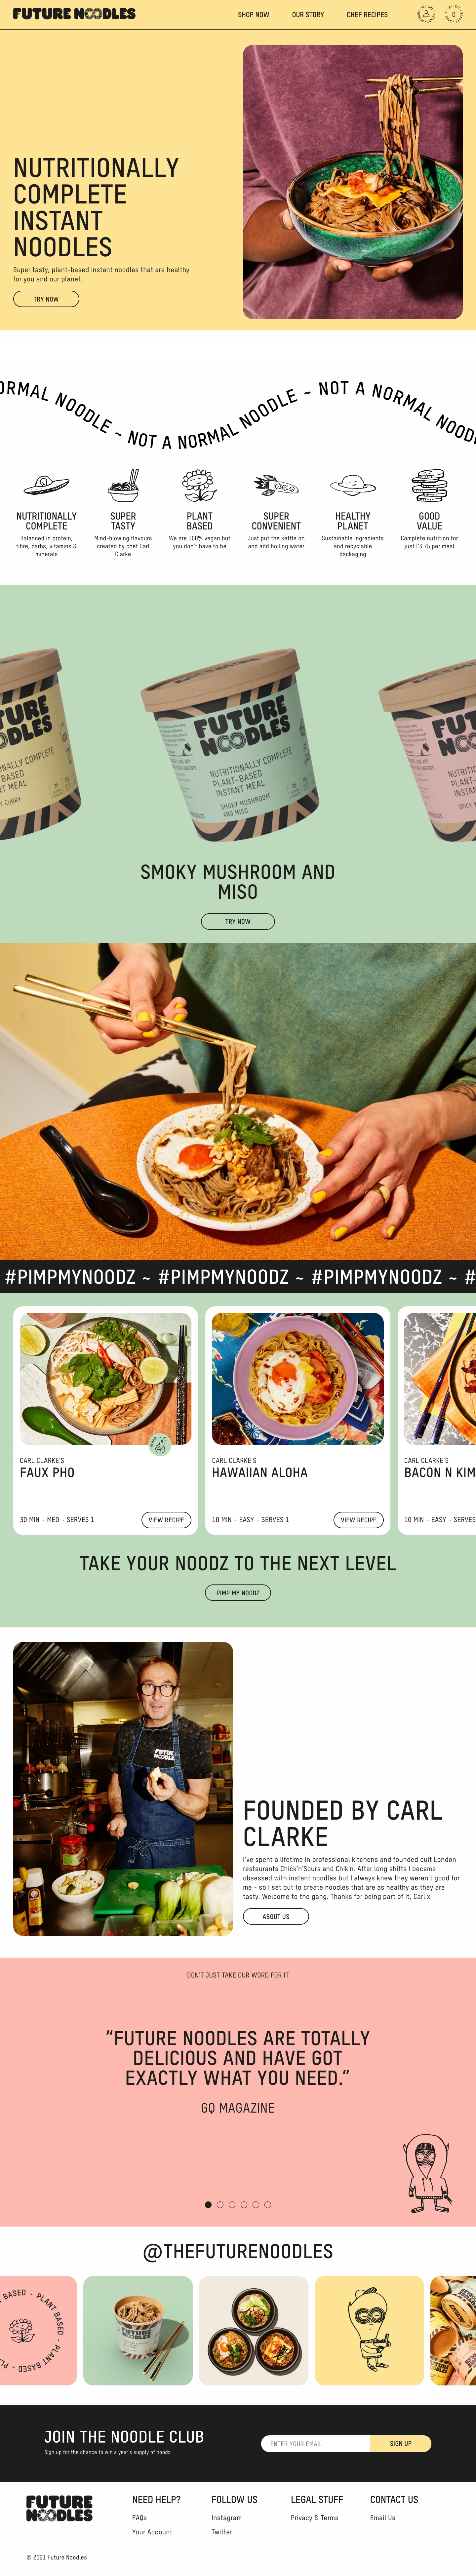 Future Noodles Landing Page Example: Future Noodles are super tasty, nutritionally complete, plant-based, convenient meals delivered to your door. Containing everything you need for a nutritionally balanced diet. Protein, fibre, fats and all 26 essential vitamins and minerals. Charity partners with FareShare. 100% Vegan & plant-based. High in protein.